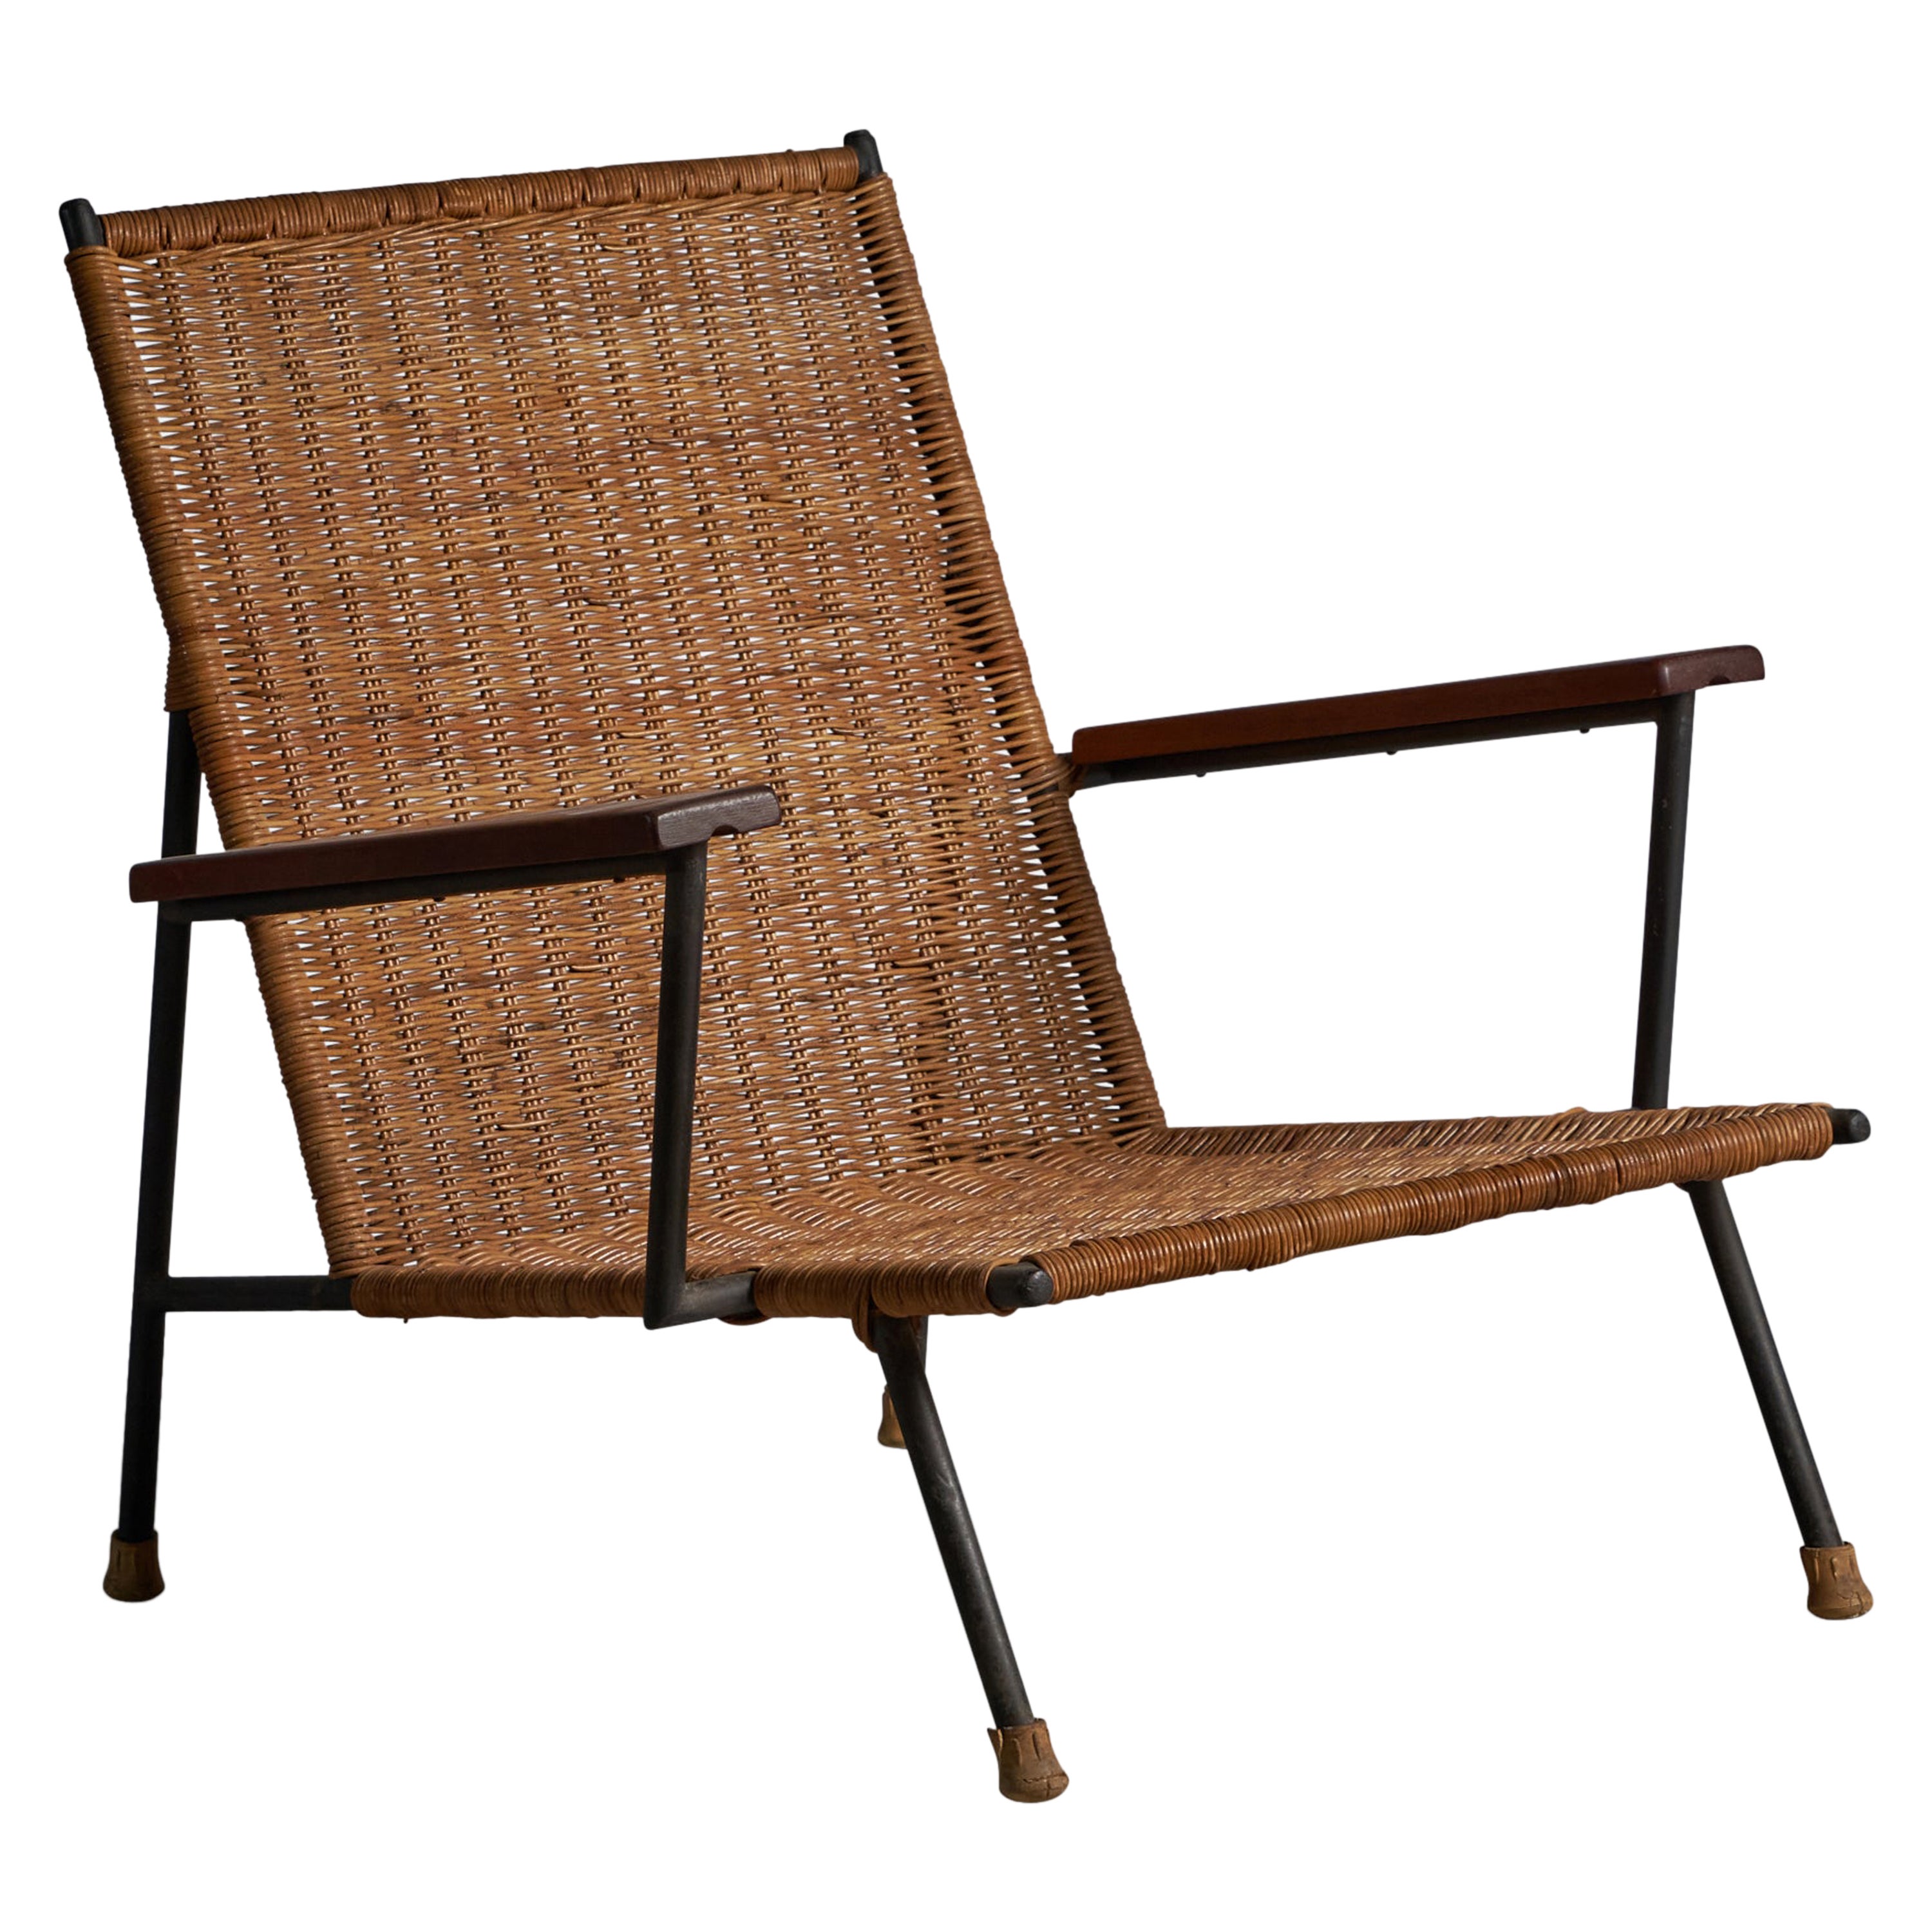 American Designer, Lounge Chair, Cane, Wood, Metal, USA, 1950s For Sale